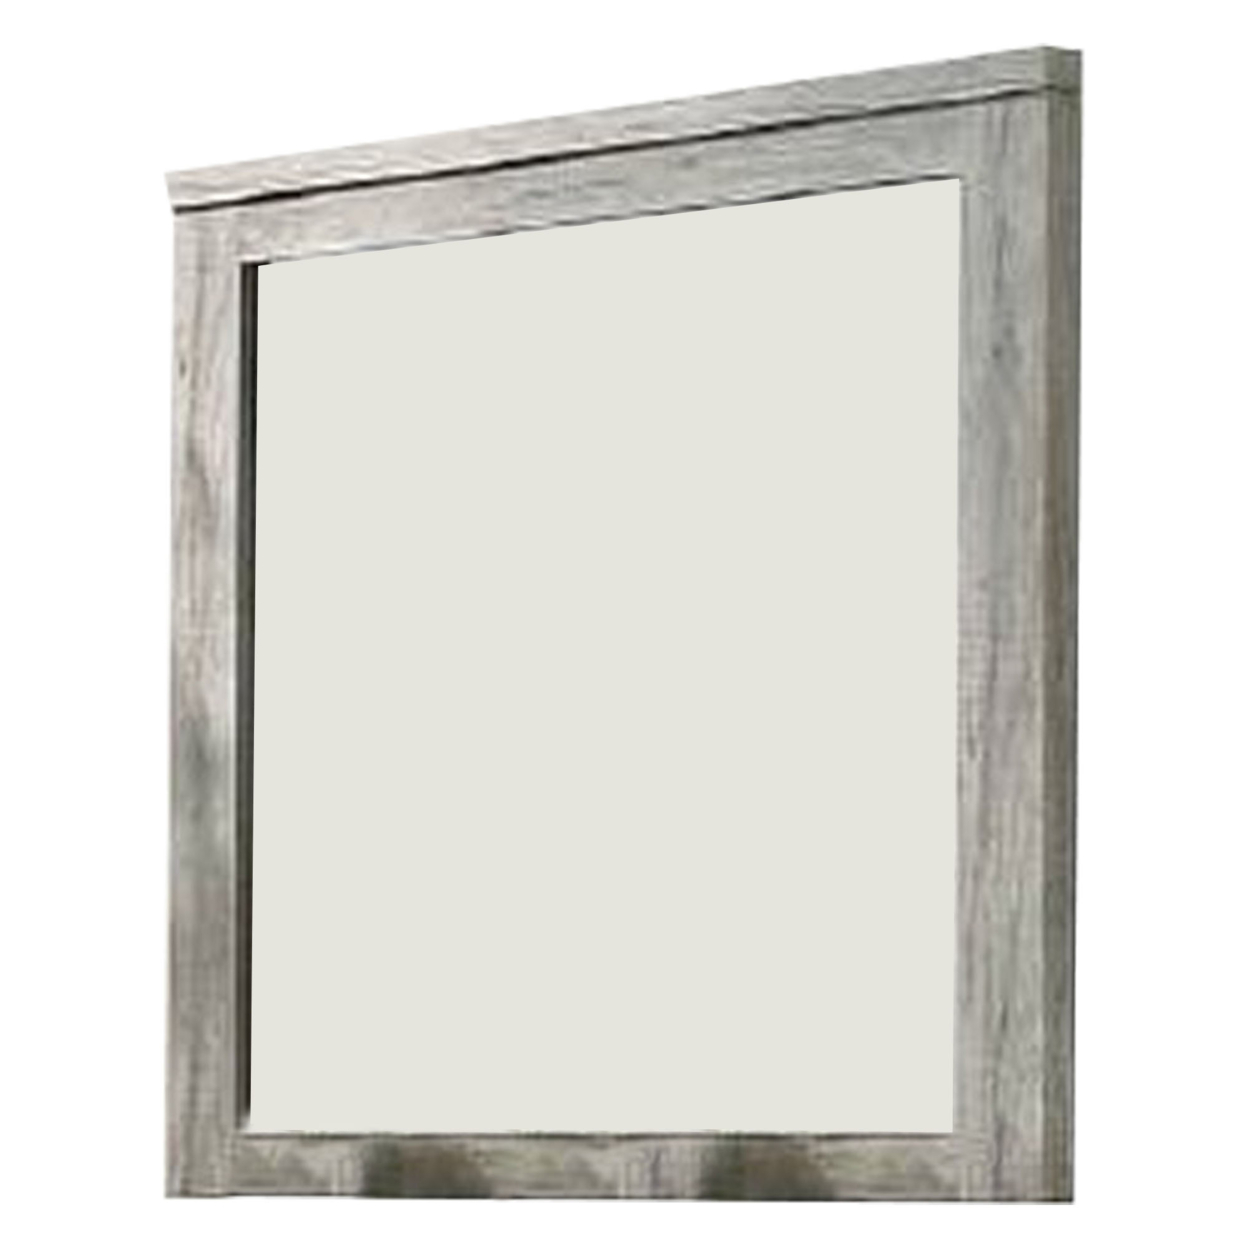 Wall Mirror With Rectangular Frame And Molded Details, Gray- Saltoro Sherpi